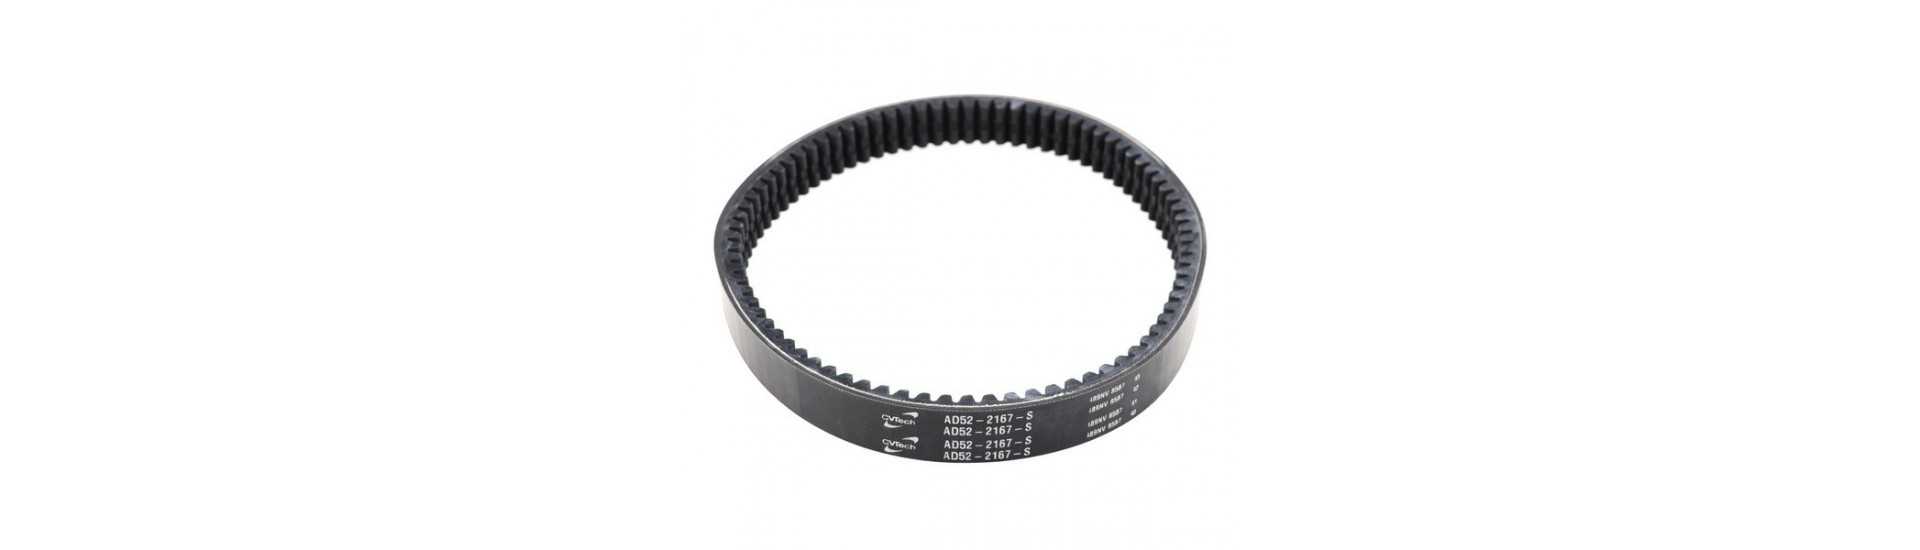 Variator belt at best price for car without permit